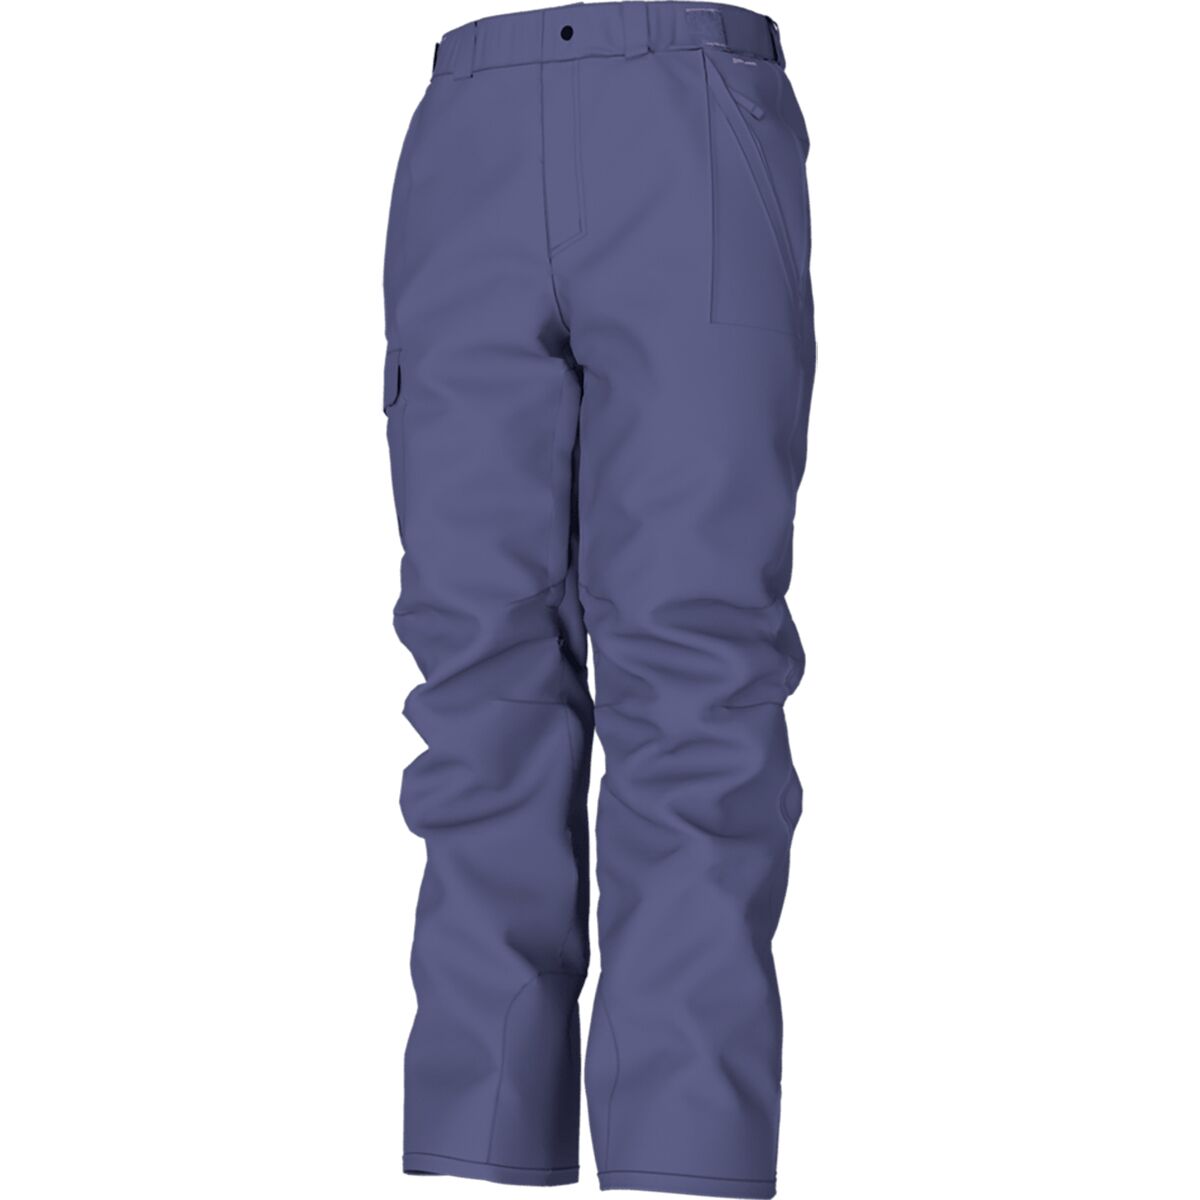 Mens The North Face Freedom Ski Snowboard Shell Waterproof Snow Pants Harbr  Blue